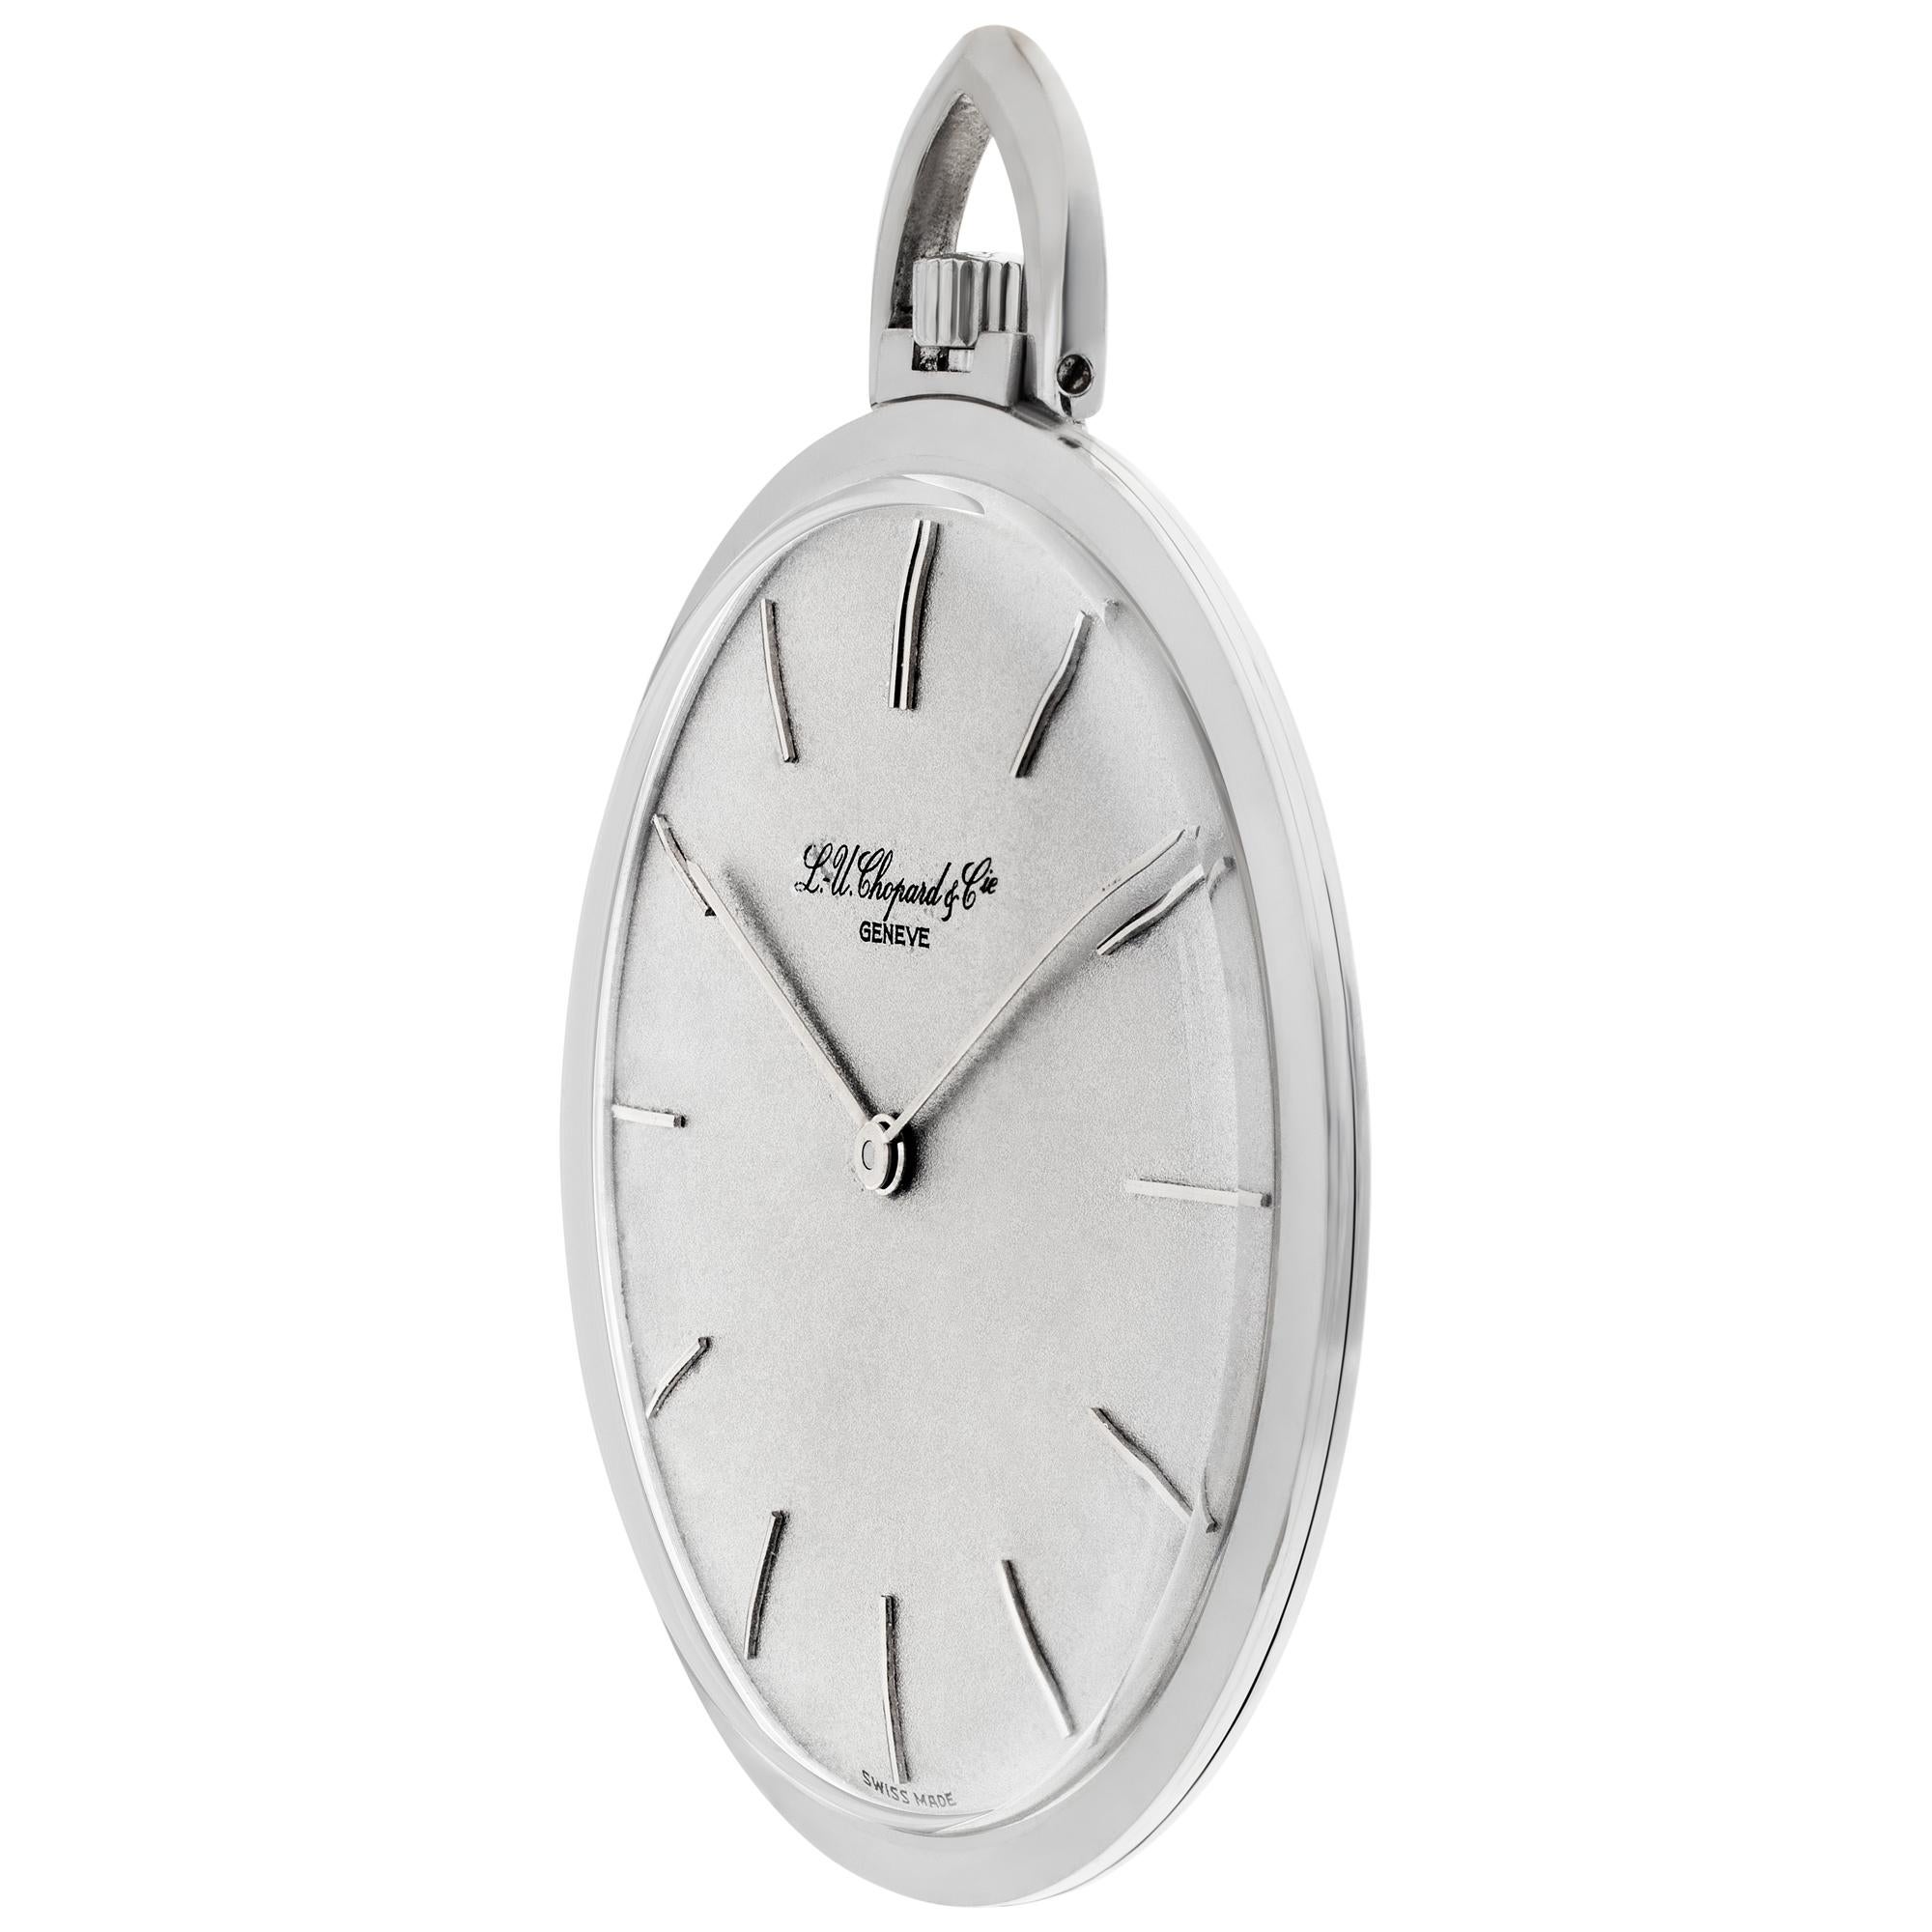 Chopard pocket watch in 18k white gold. Manual. 41 mm case size. Ref 9877. Fine Pre-owned Chopard Watch. Certified preowned Vintage Chopard pocket watch 9877 watch is made out of white gold. This Chopard watch has a 41  x 41 mm  case with a Round